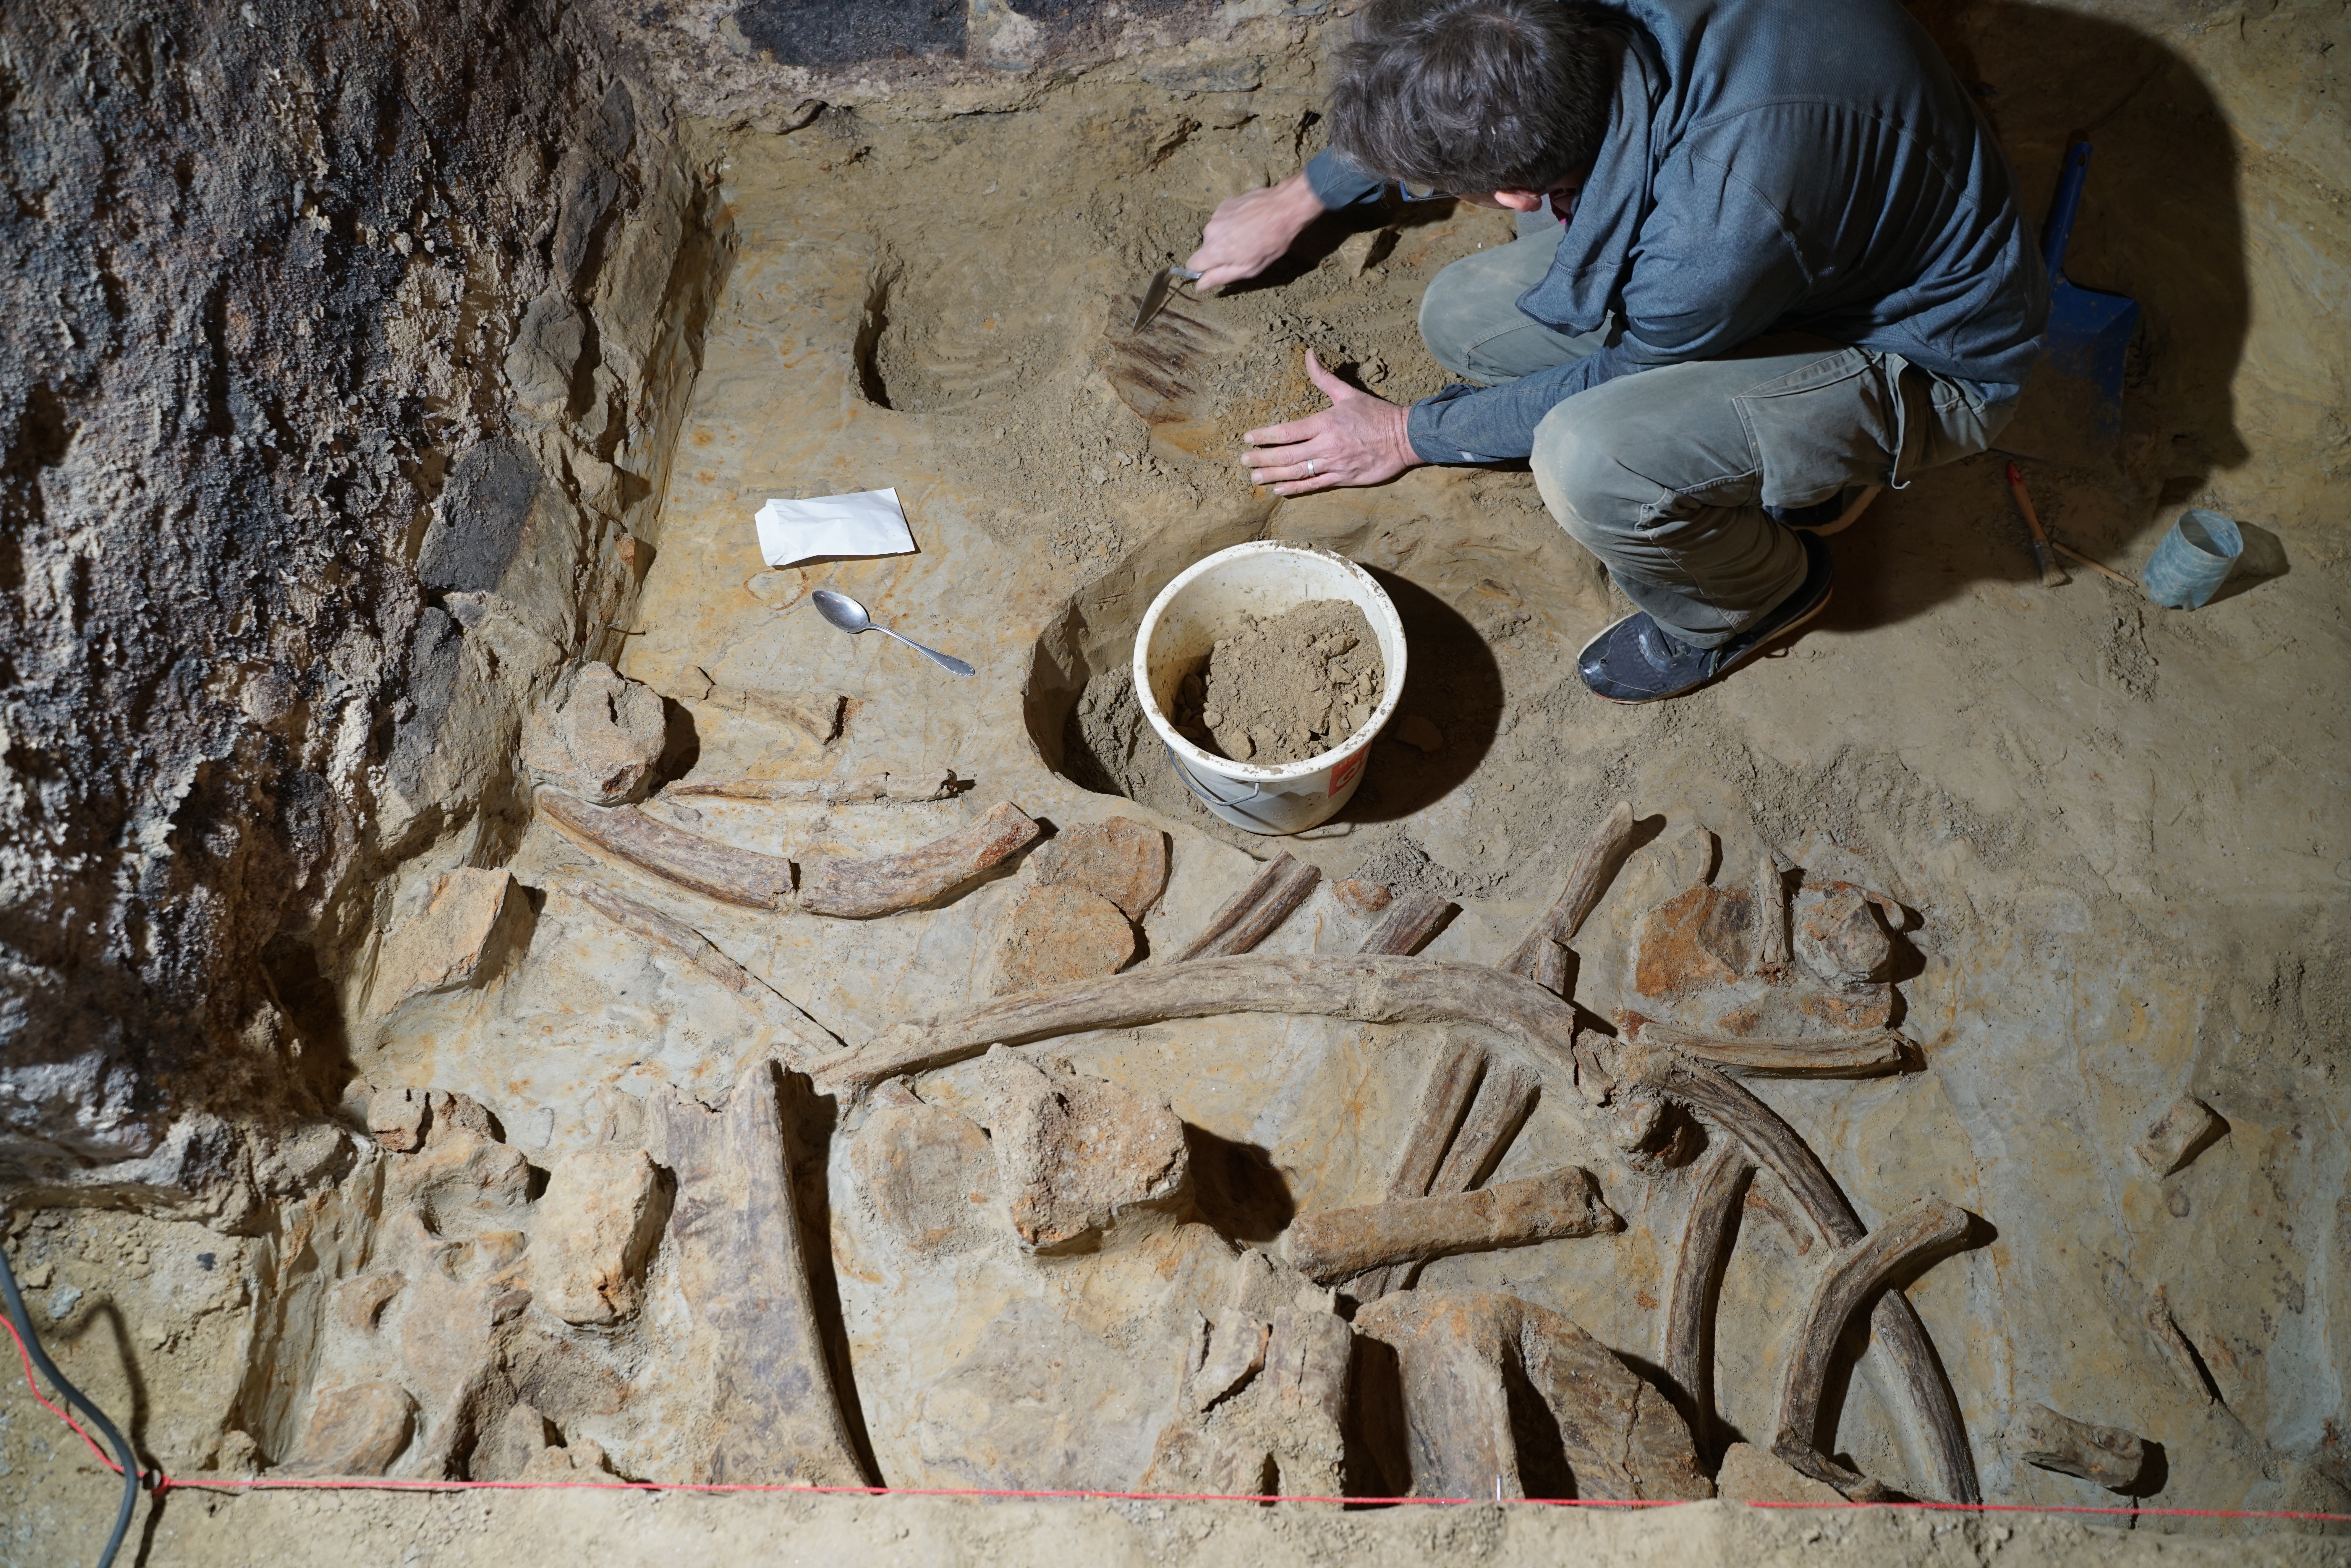 Marc H&auml;ndel, an archaeologist with the&nbsp;Austrian Academy of Sciences, excavates rib bones in the wine cellar.